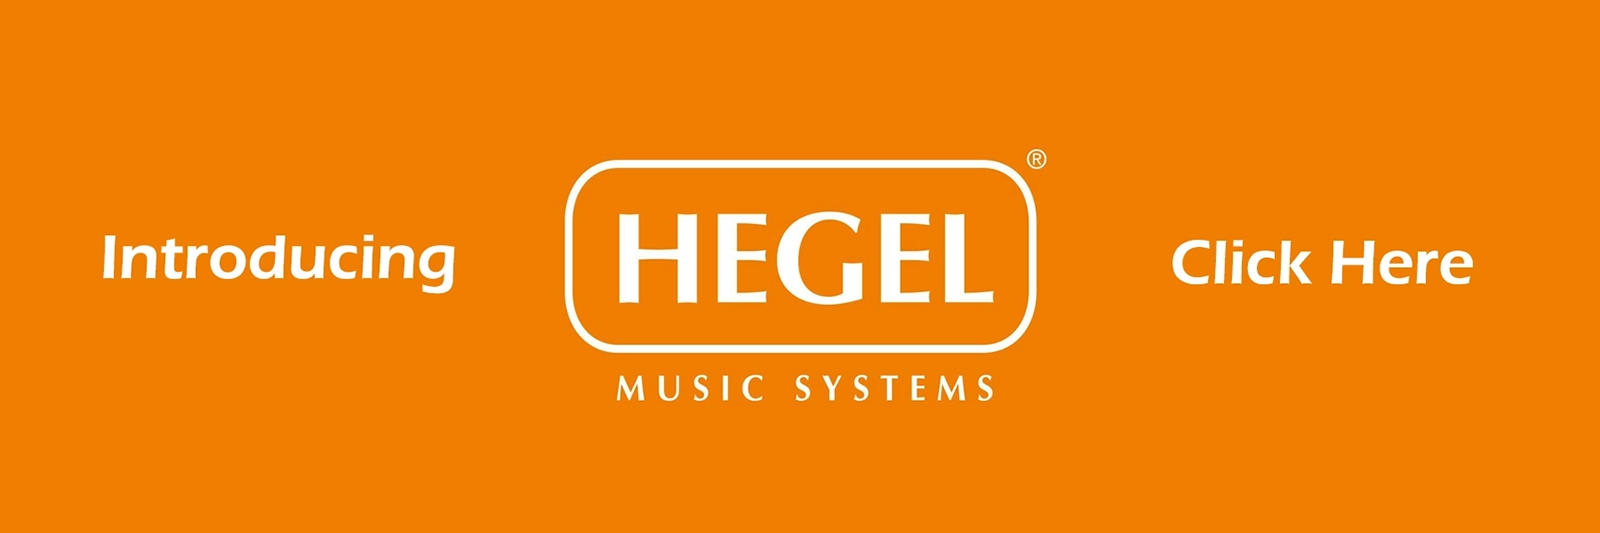 Introducing Hegel Music Systems to castle hill